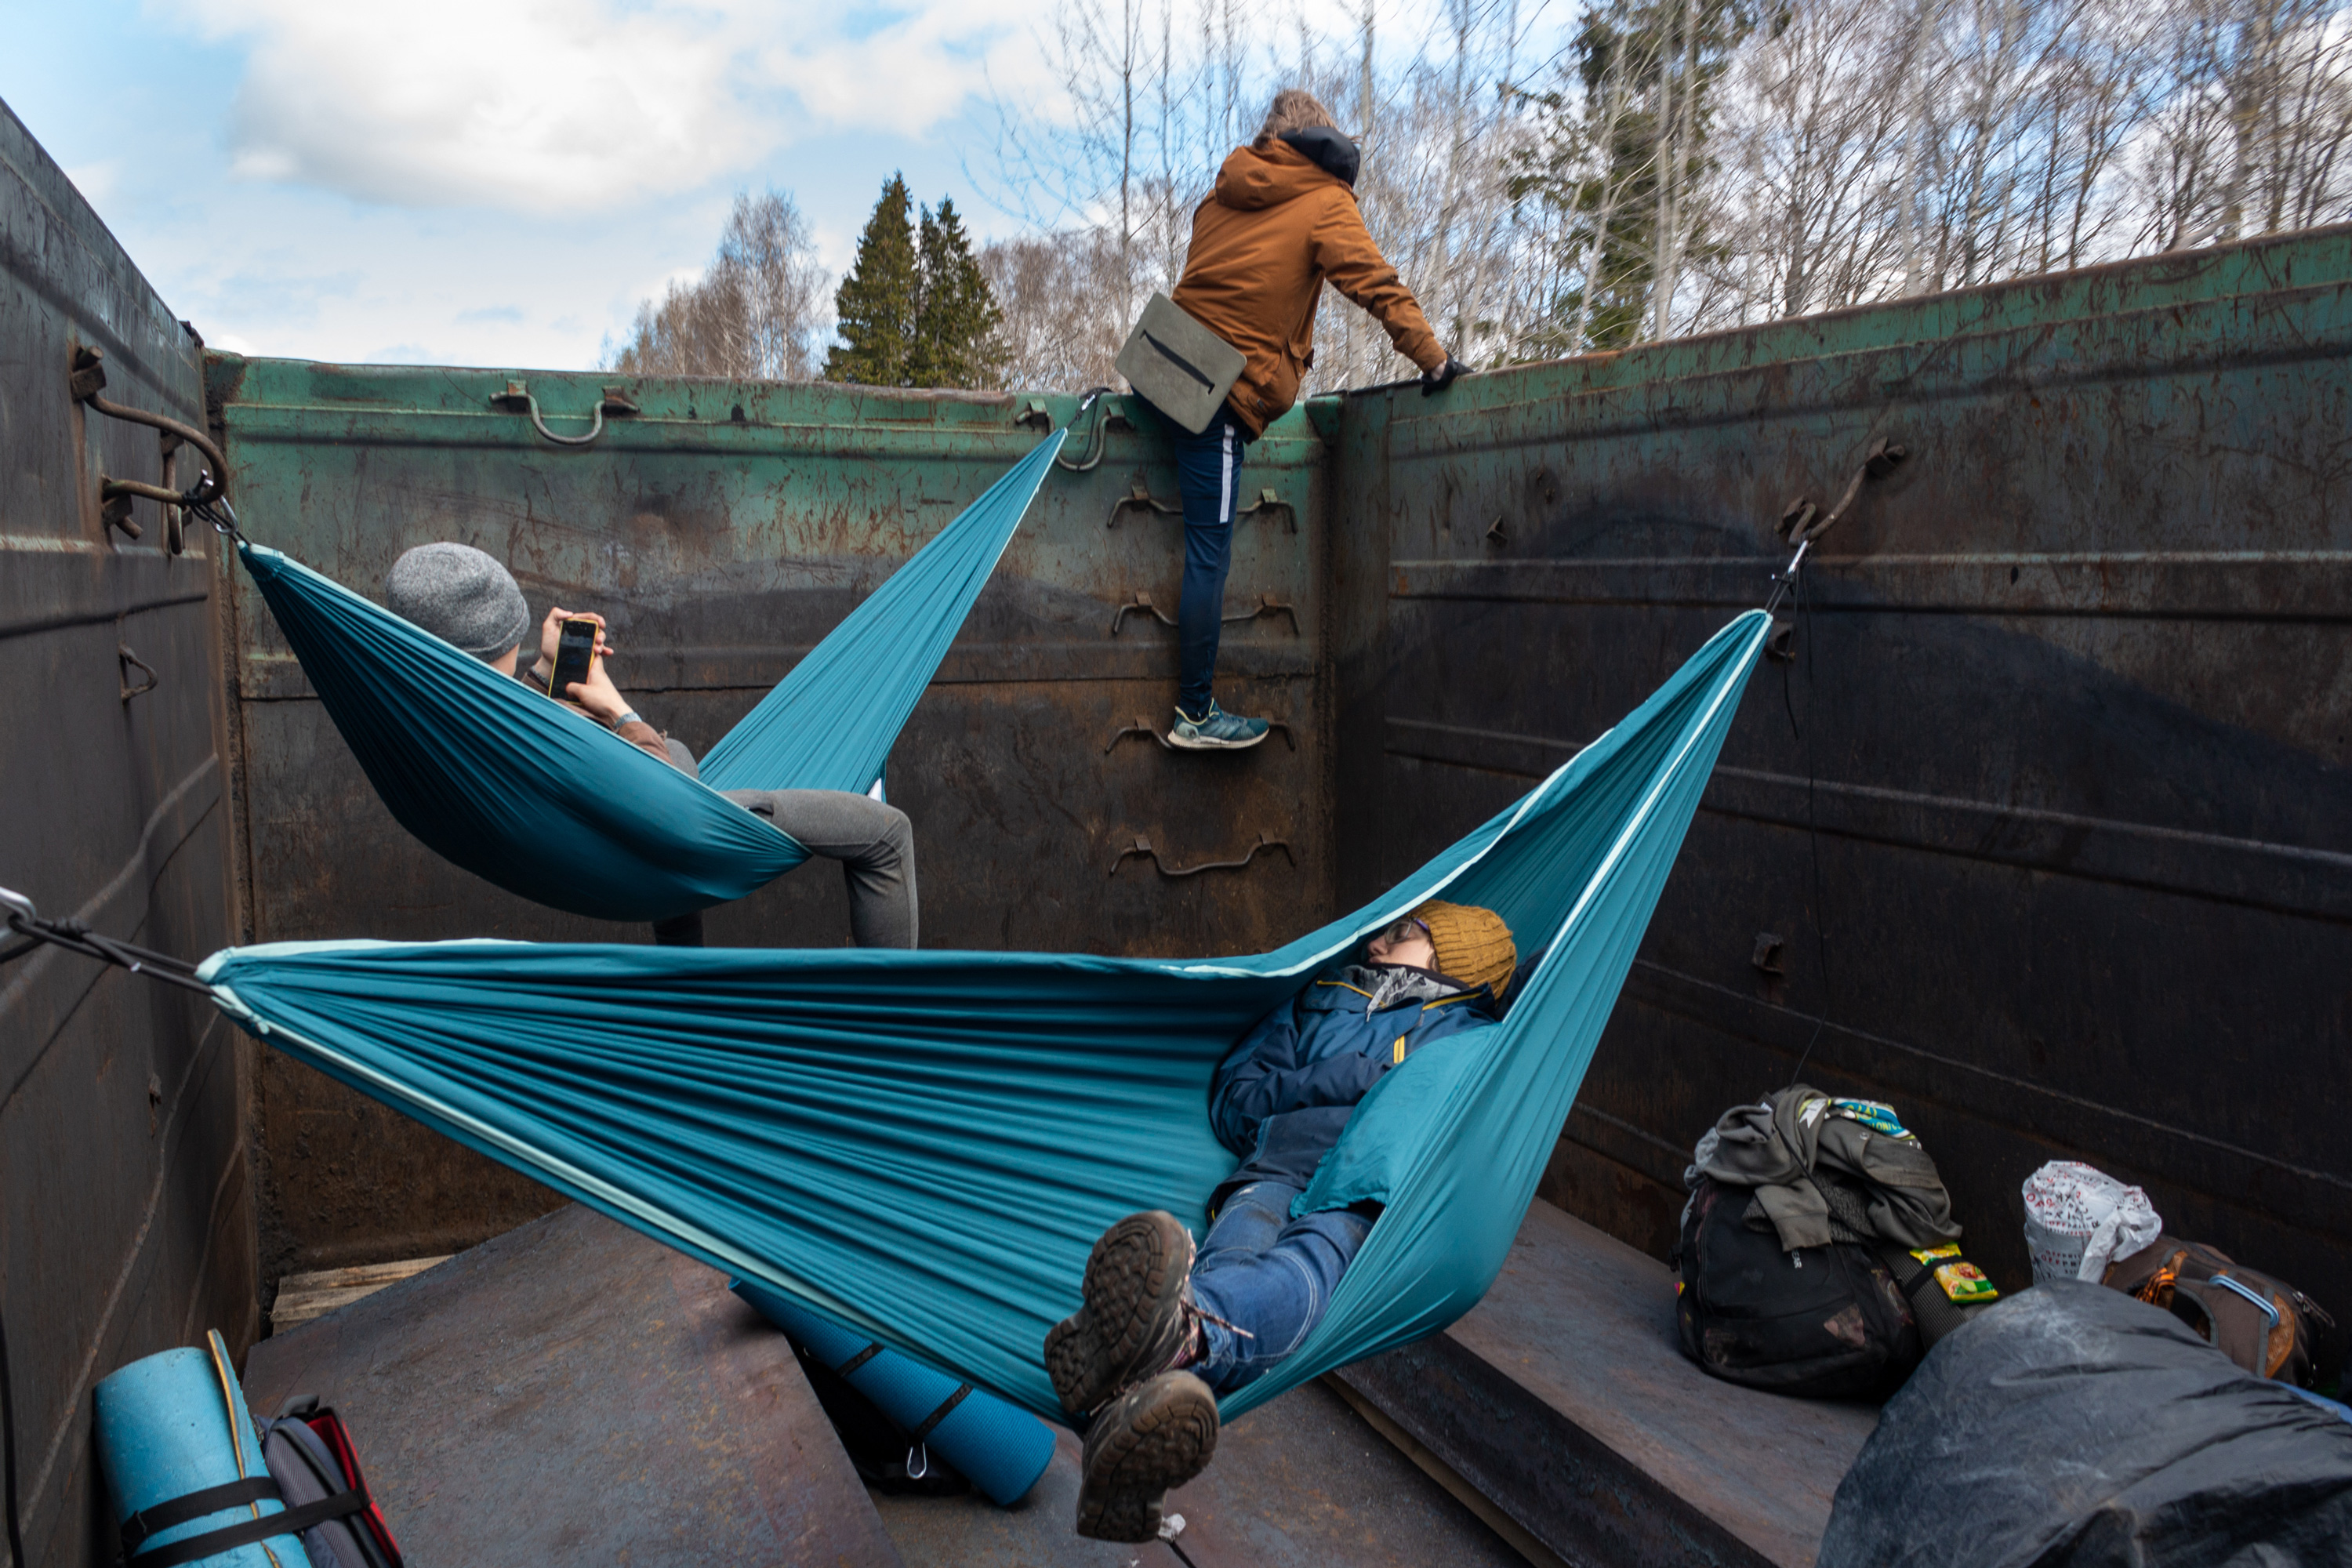 Valya, Vlad and Artem. The loops inside the wagon are often used to hang hammocks.